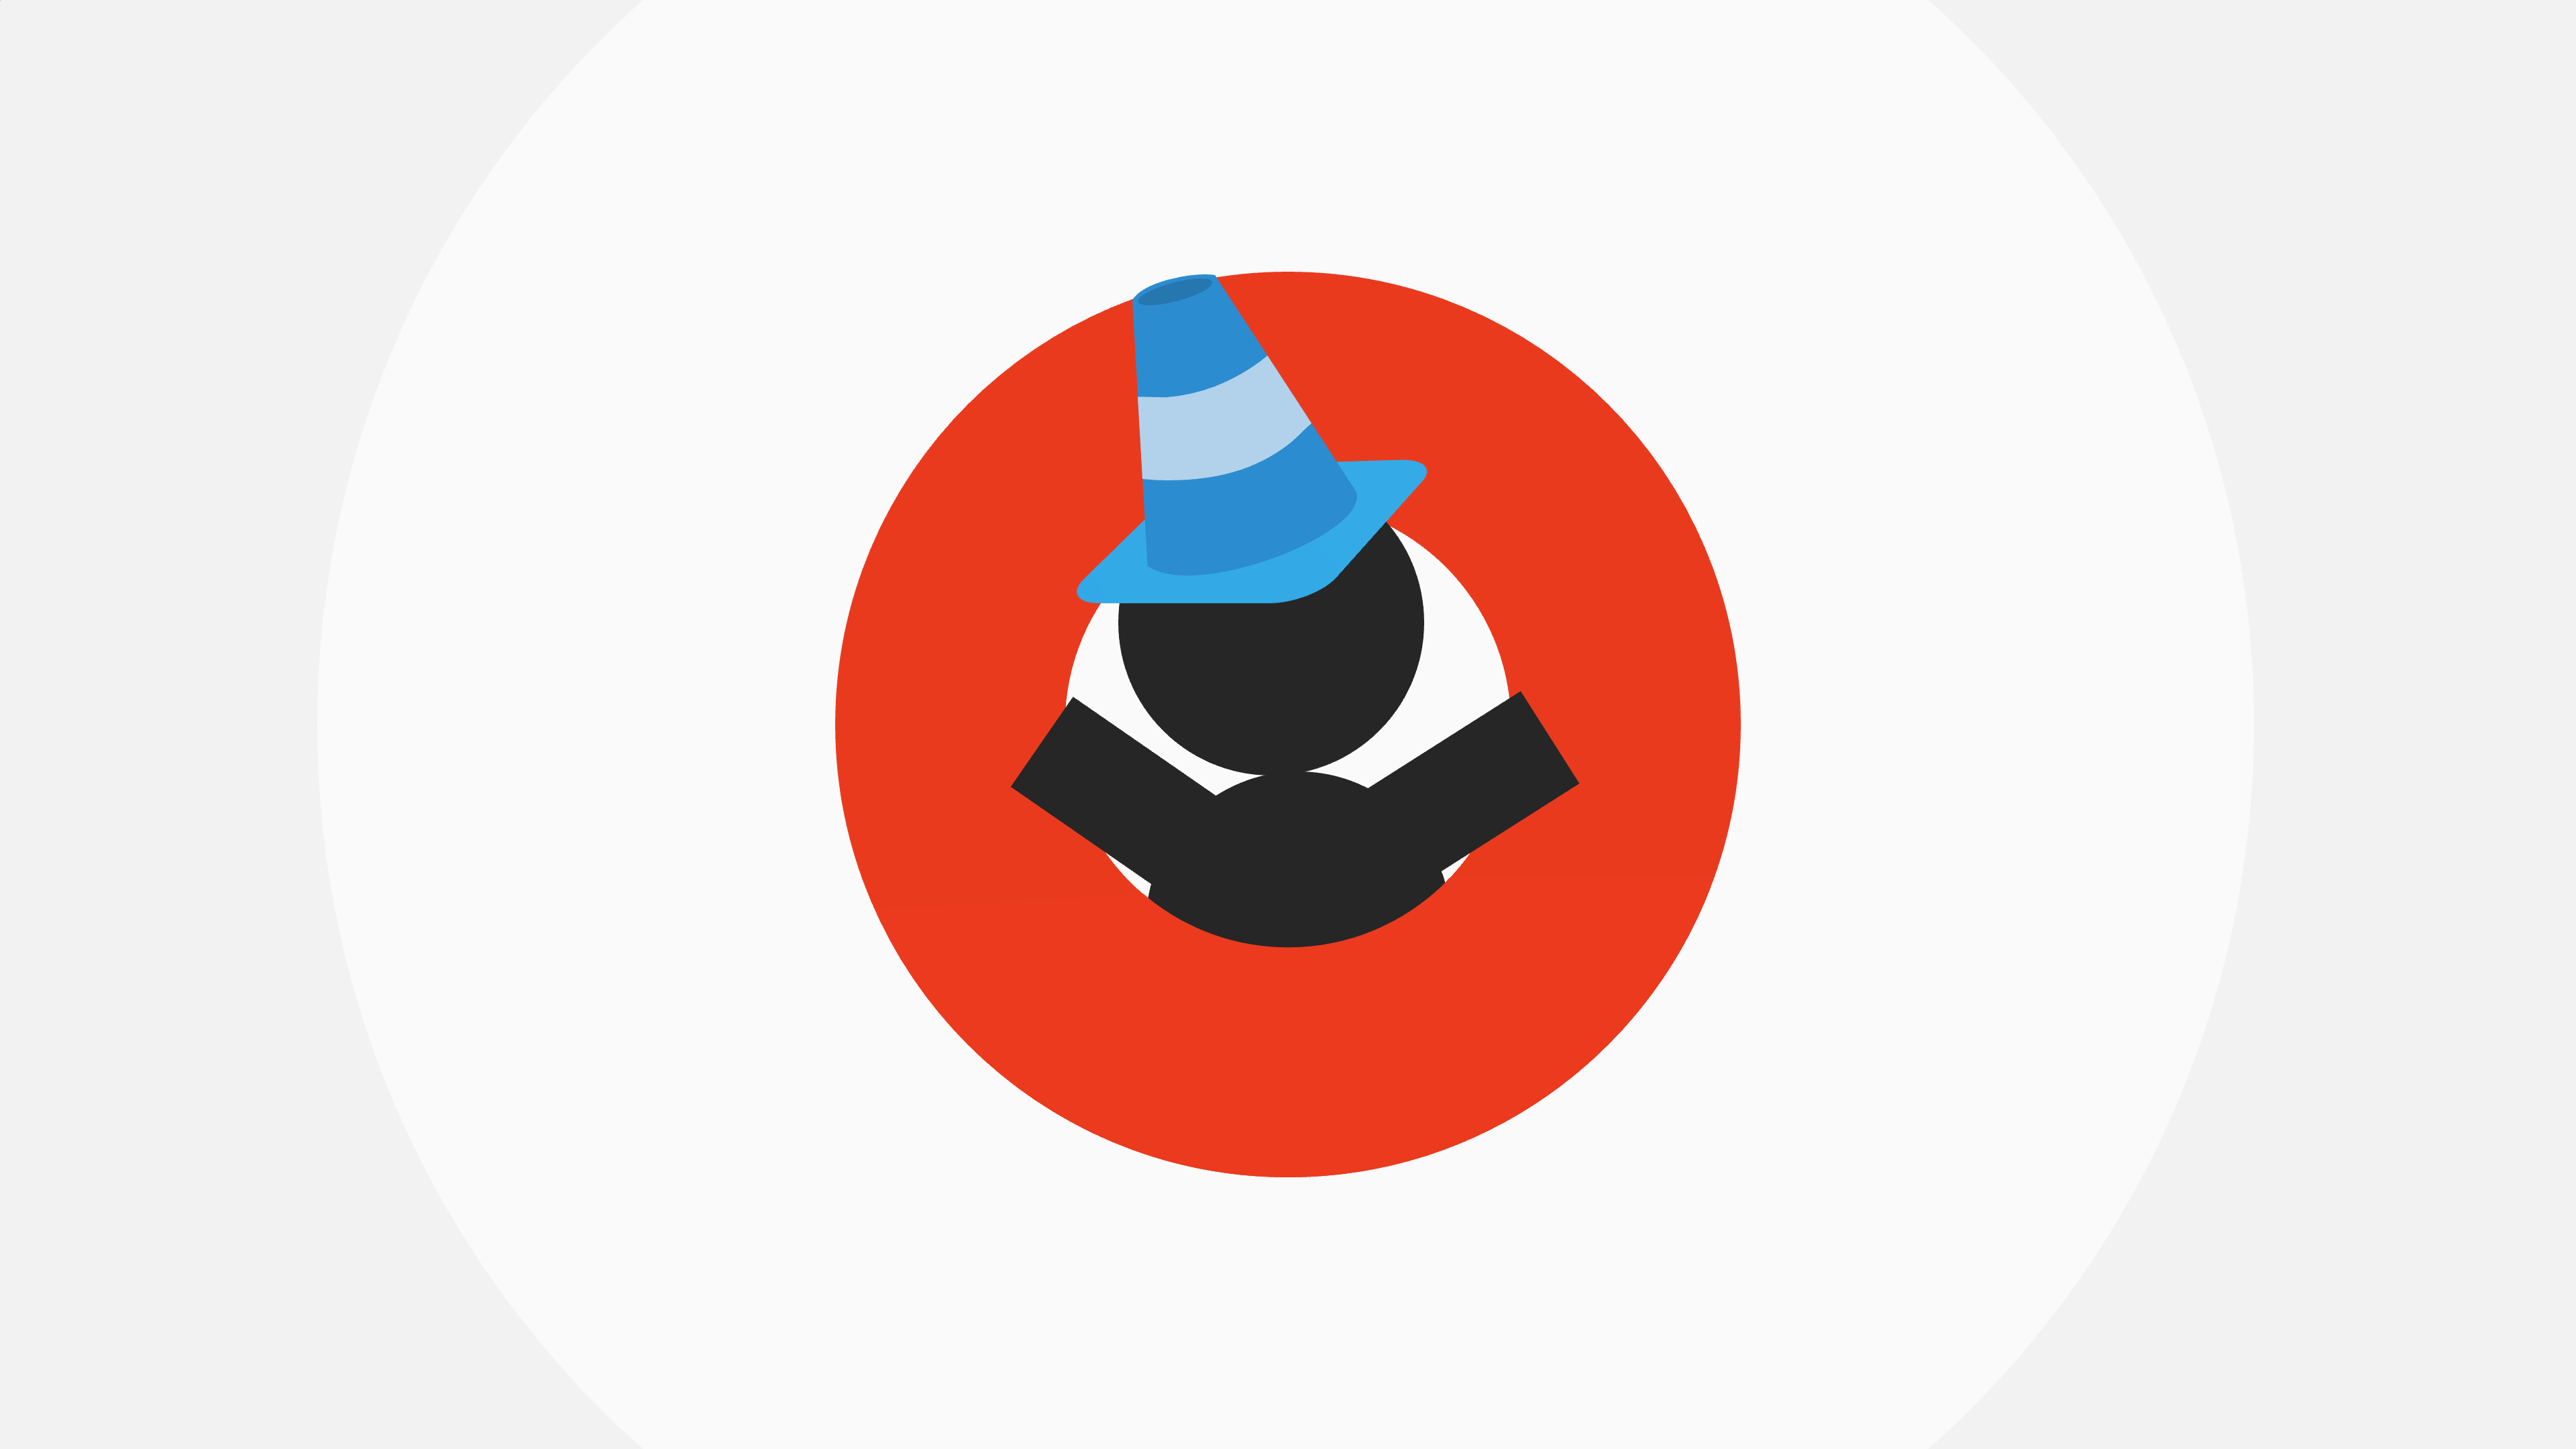 A stick figure wearing a traffic cone emerges from a red circle